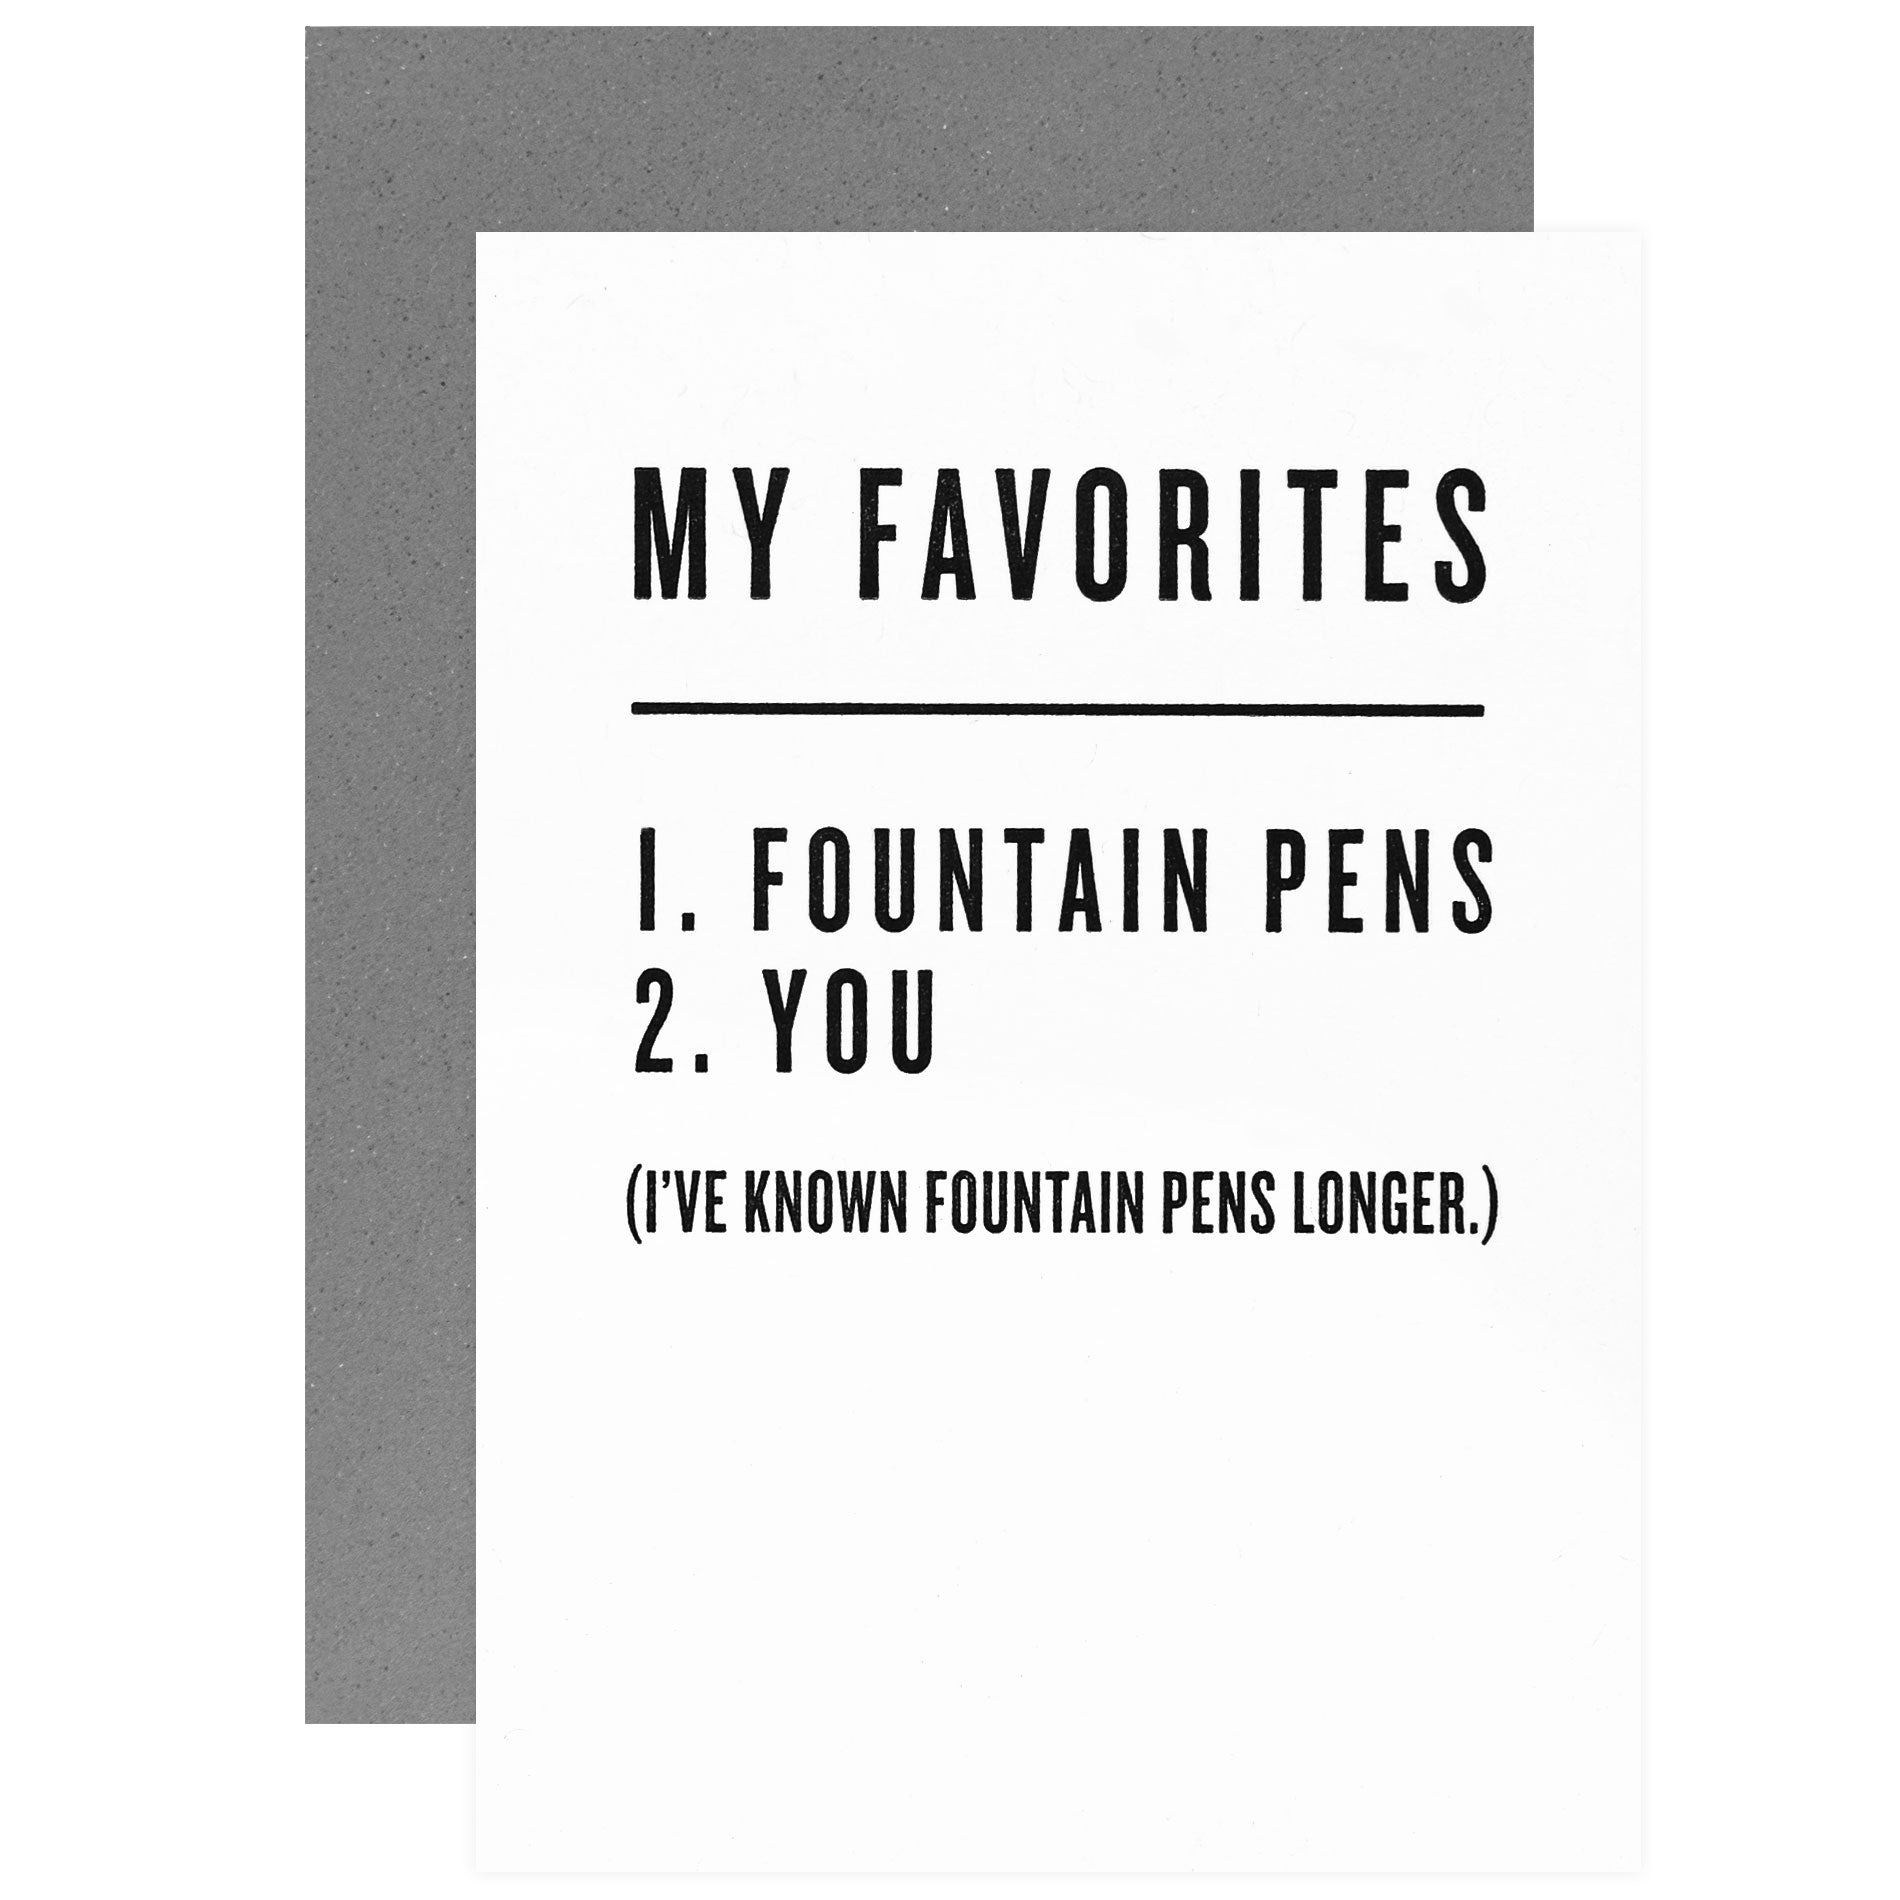 Constellation & Co. My Favorites 1. Fountain Pens 2. You Greeting Card 